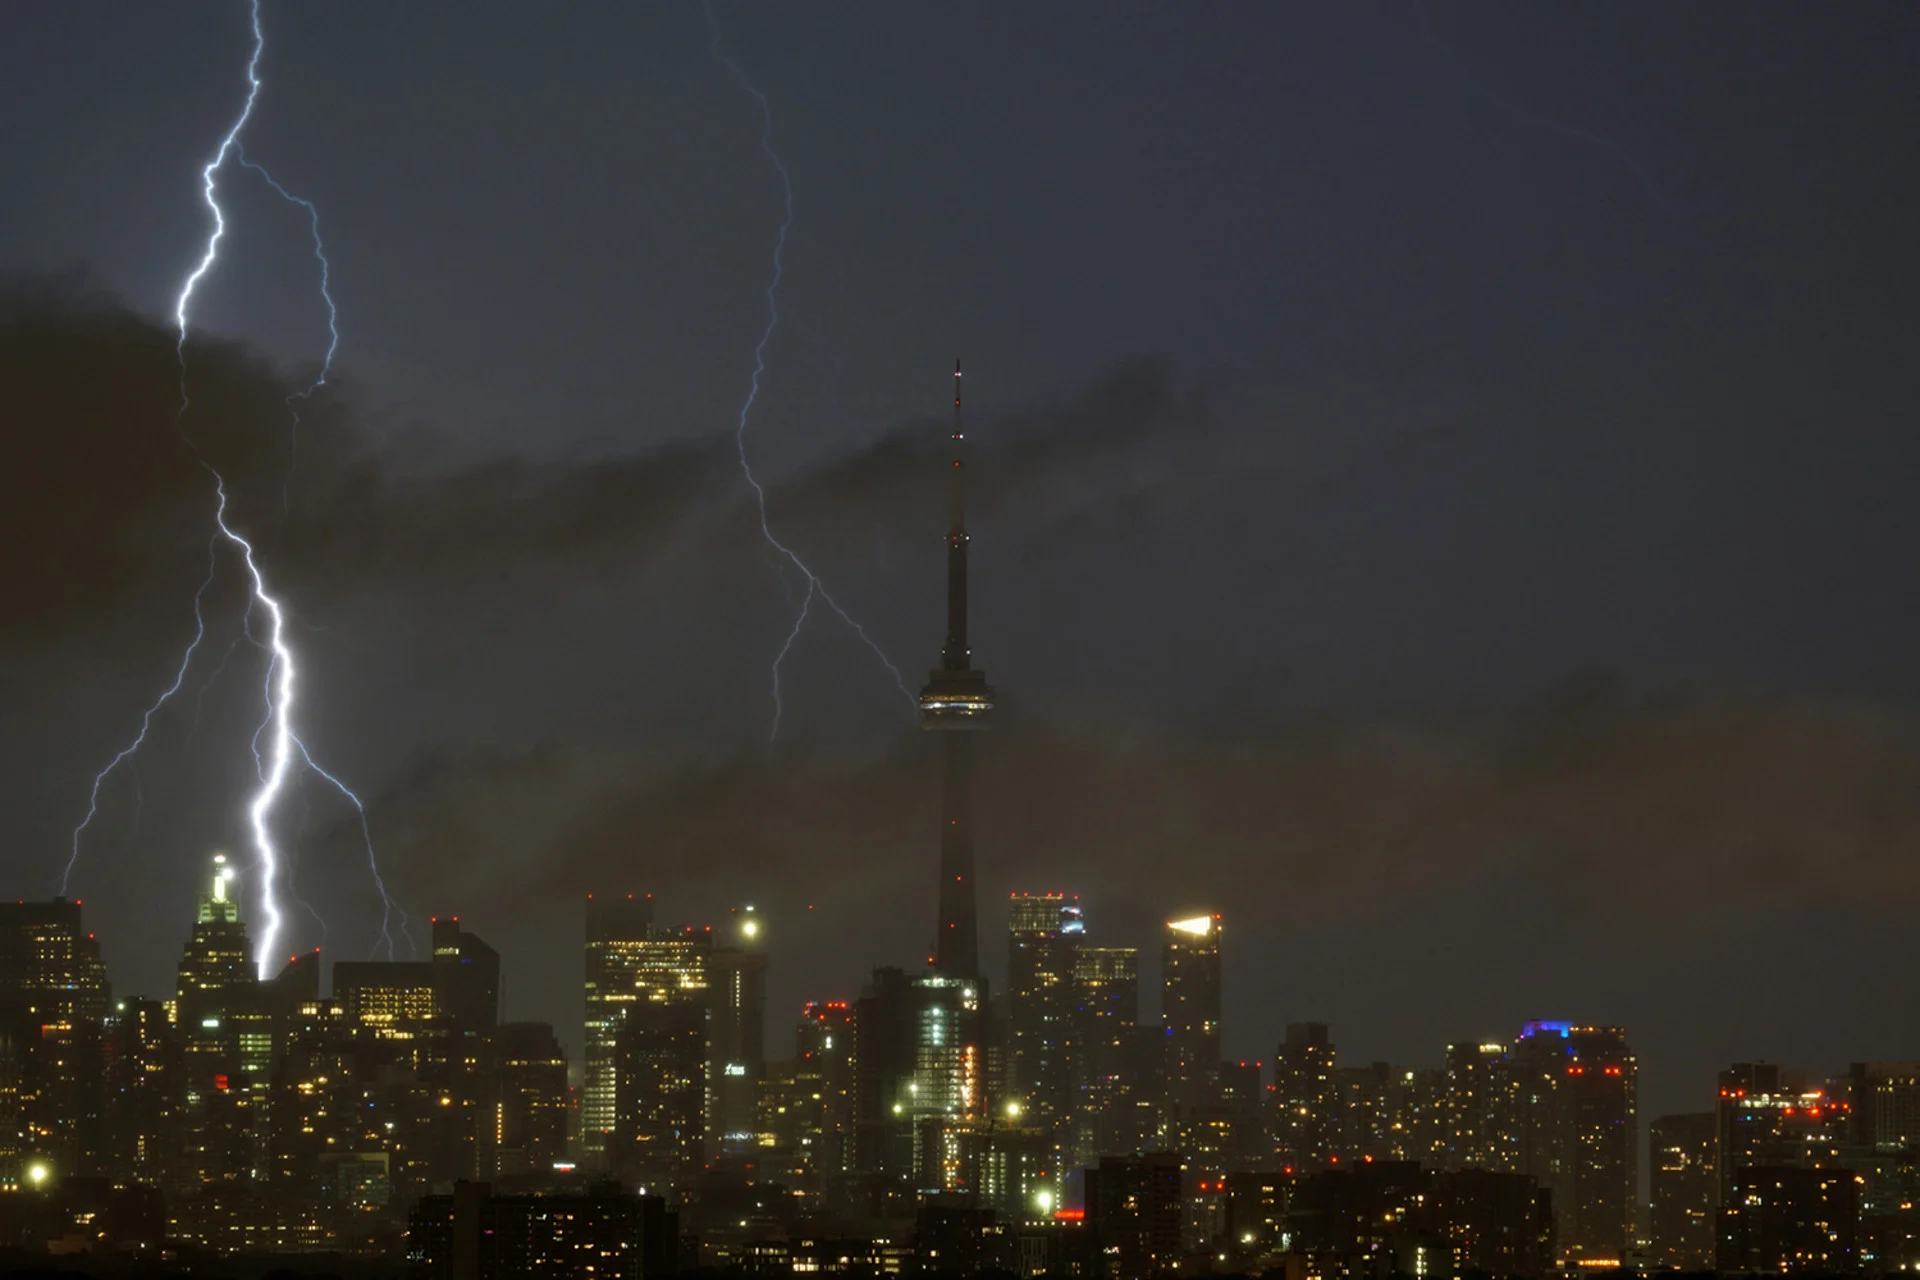 Southern Ontario faces summery Sunday with another risk of storms